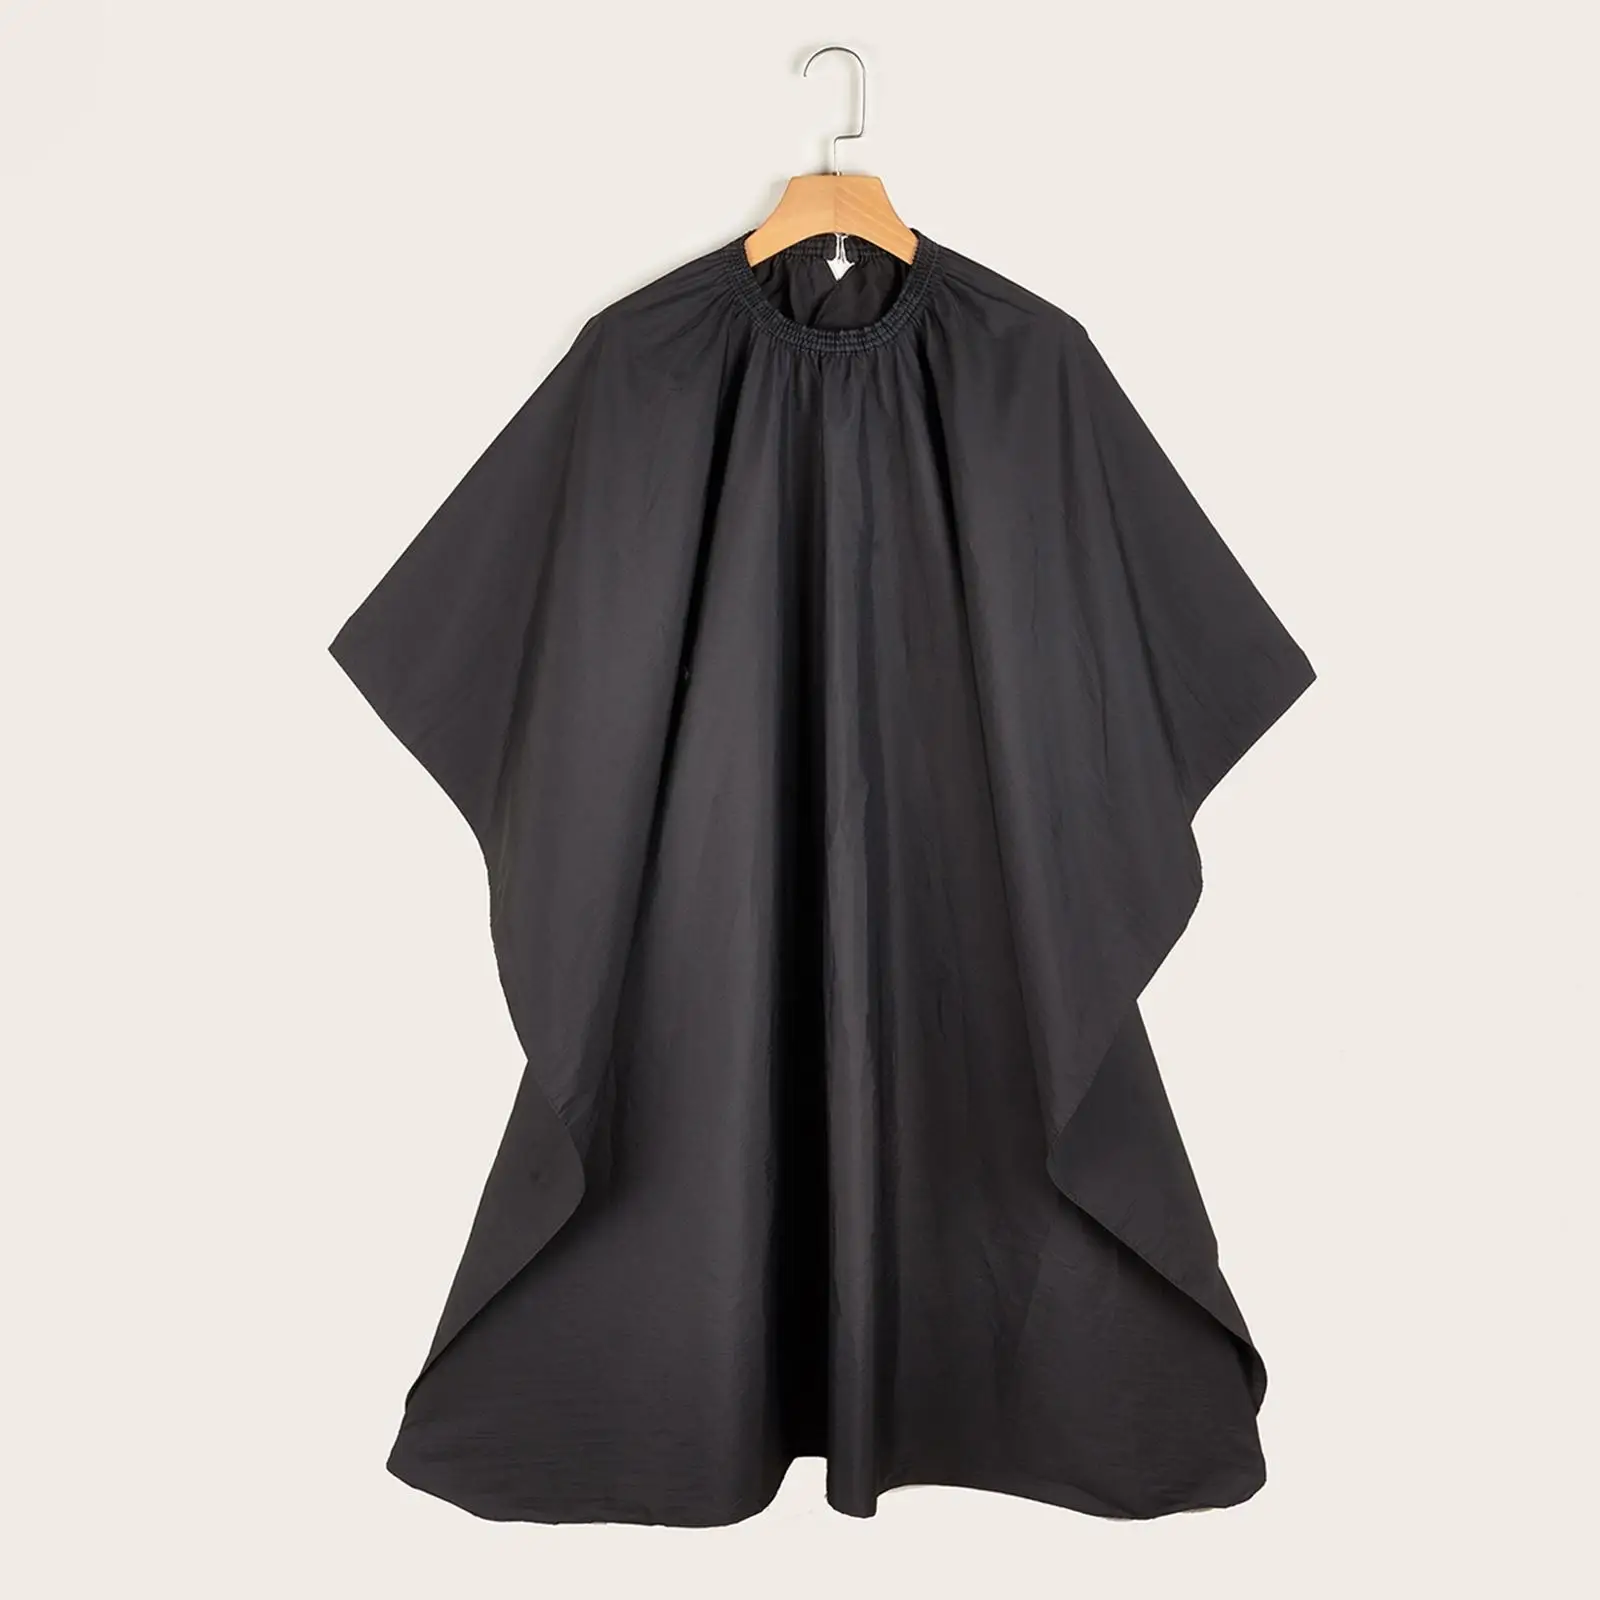 Durable Barber Cape 47Inx57in Hairdressing Gown Cloth with Adjustable Neckline Waterproof Hair Cutting Apron for Hairdresser